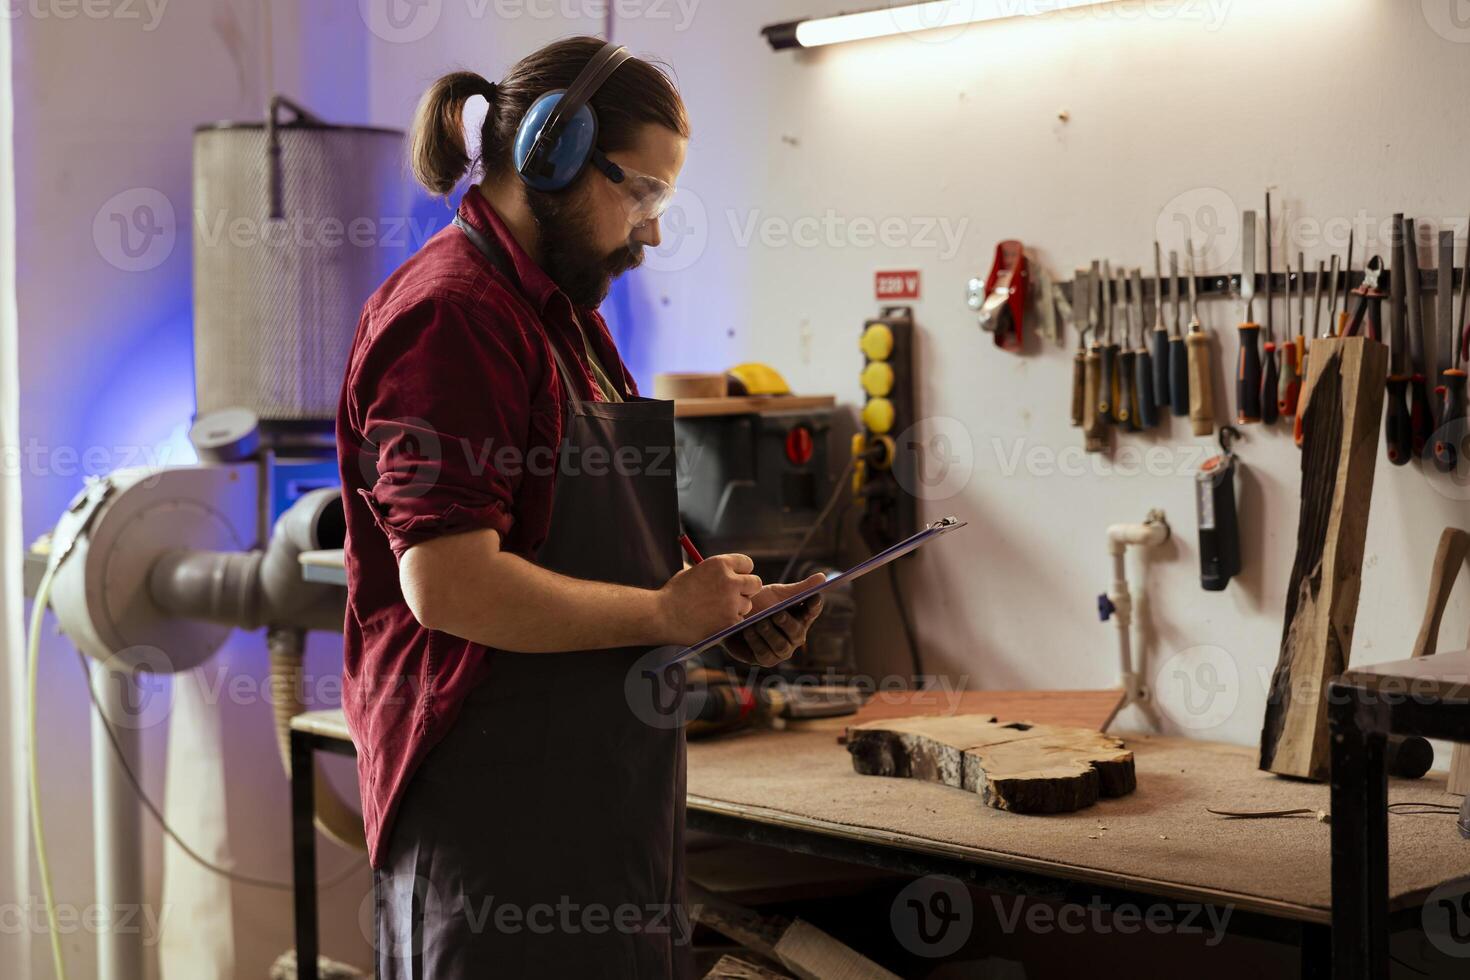 Carpenter wearing safety glasses drawing blueprints on notepad to make creative wood art pieces. Artisan looking at technical schematics to execute woodworking projects, using protective gear photo